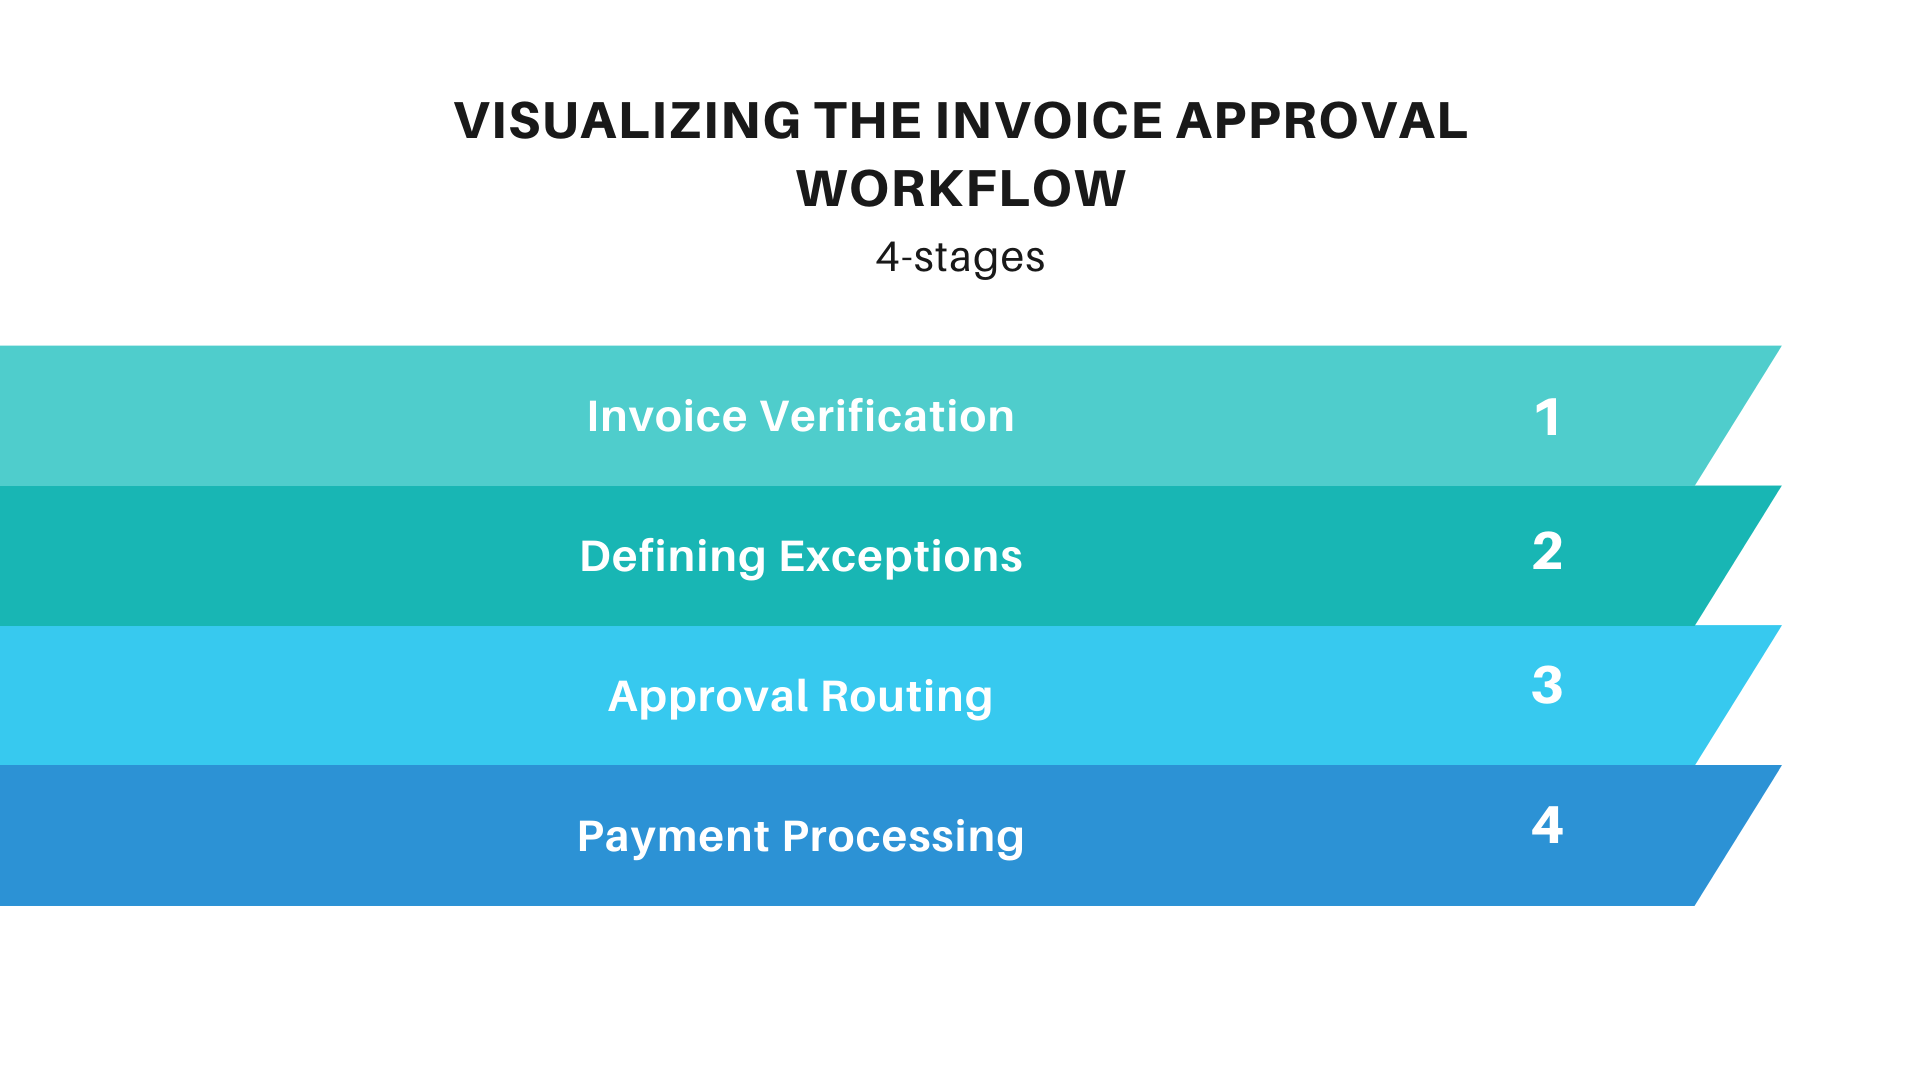 Visualizing the Invoice Approval Workflow